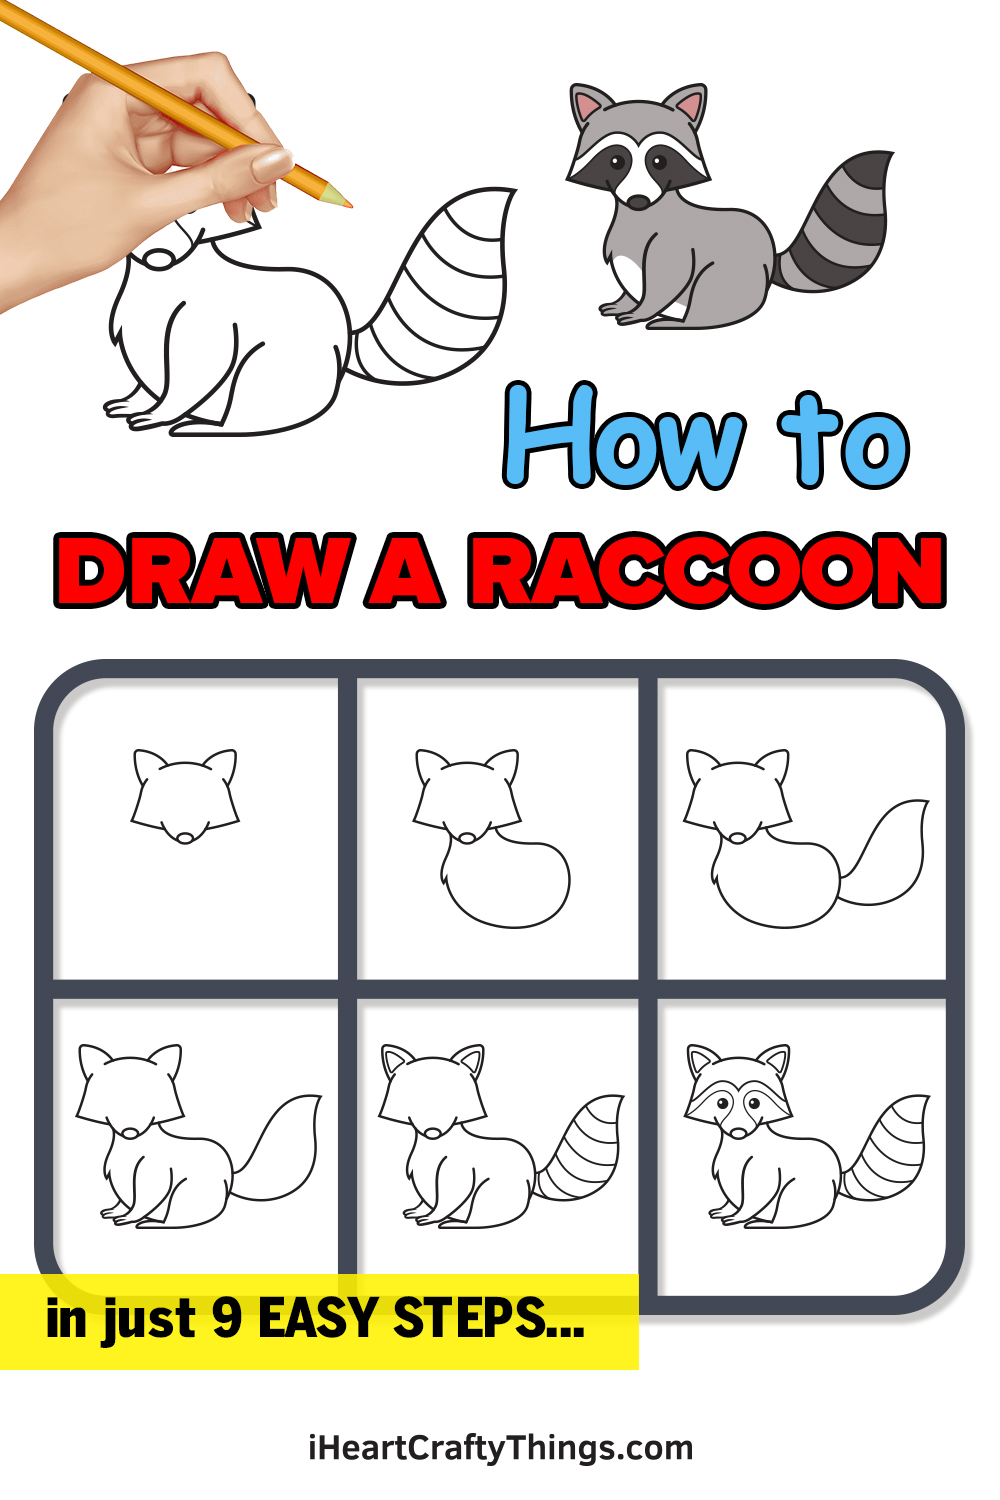 how to draw a raccoon in 9 easy steps